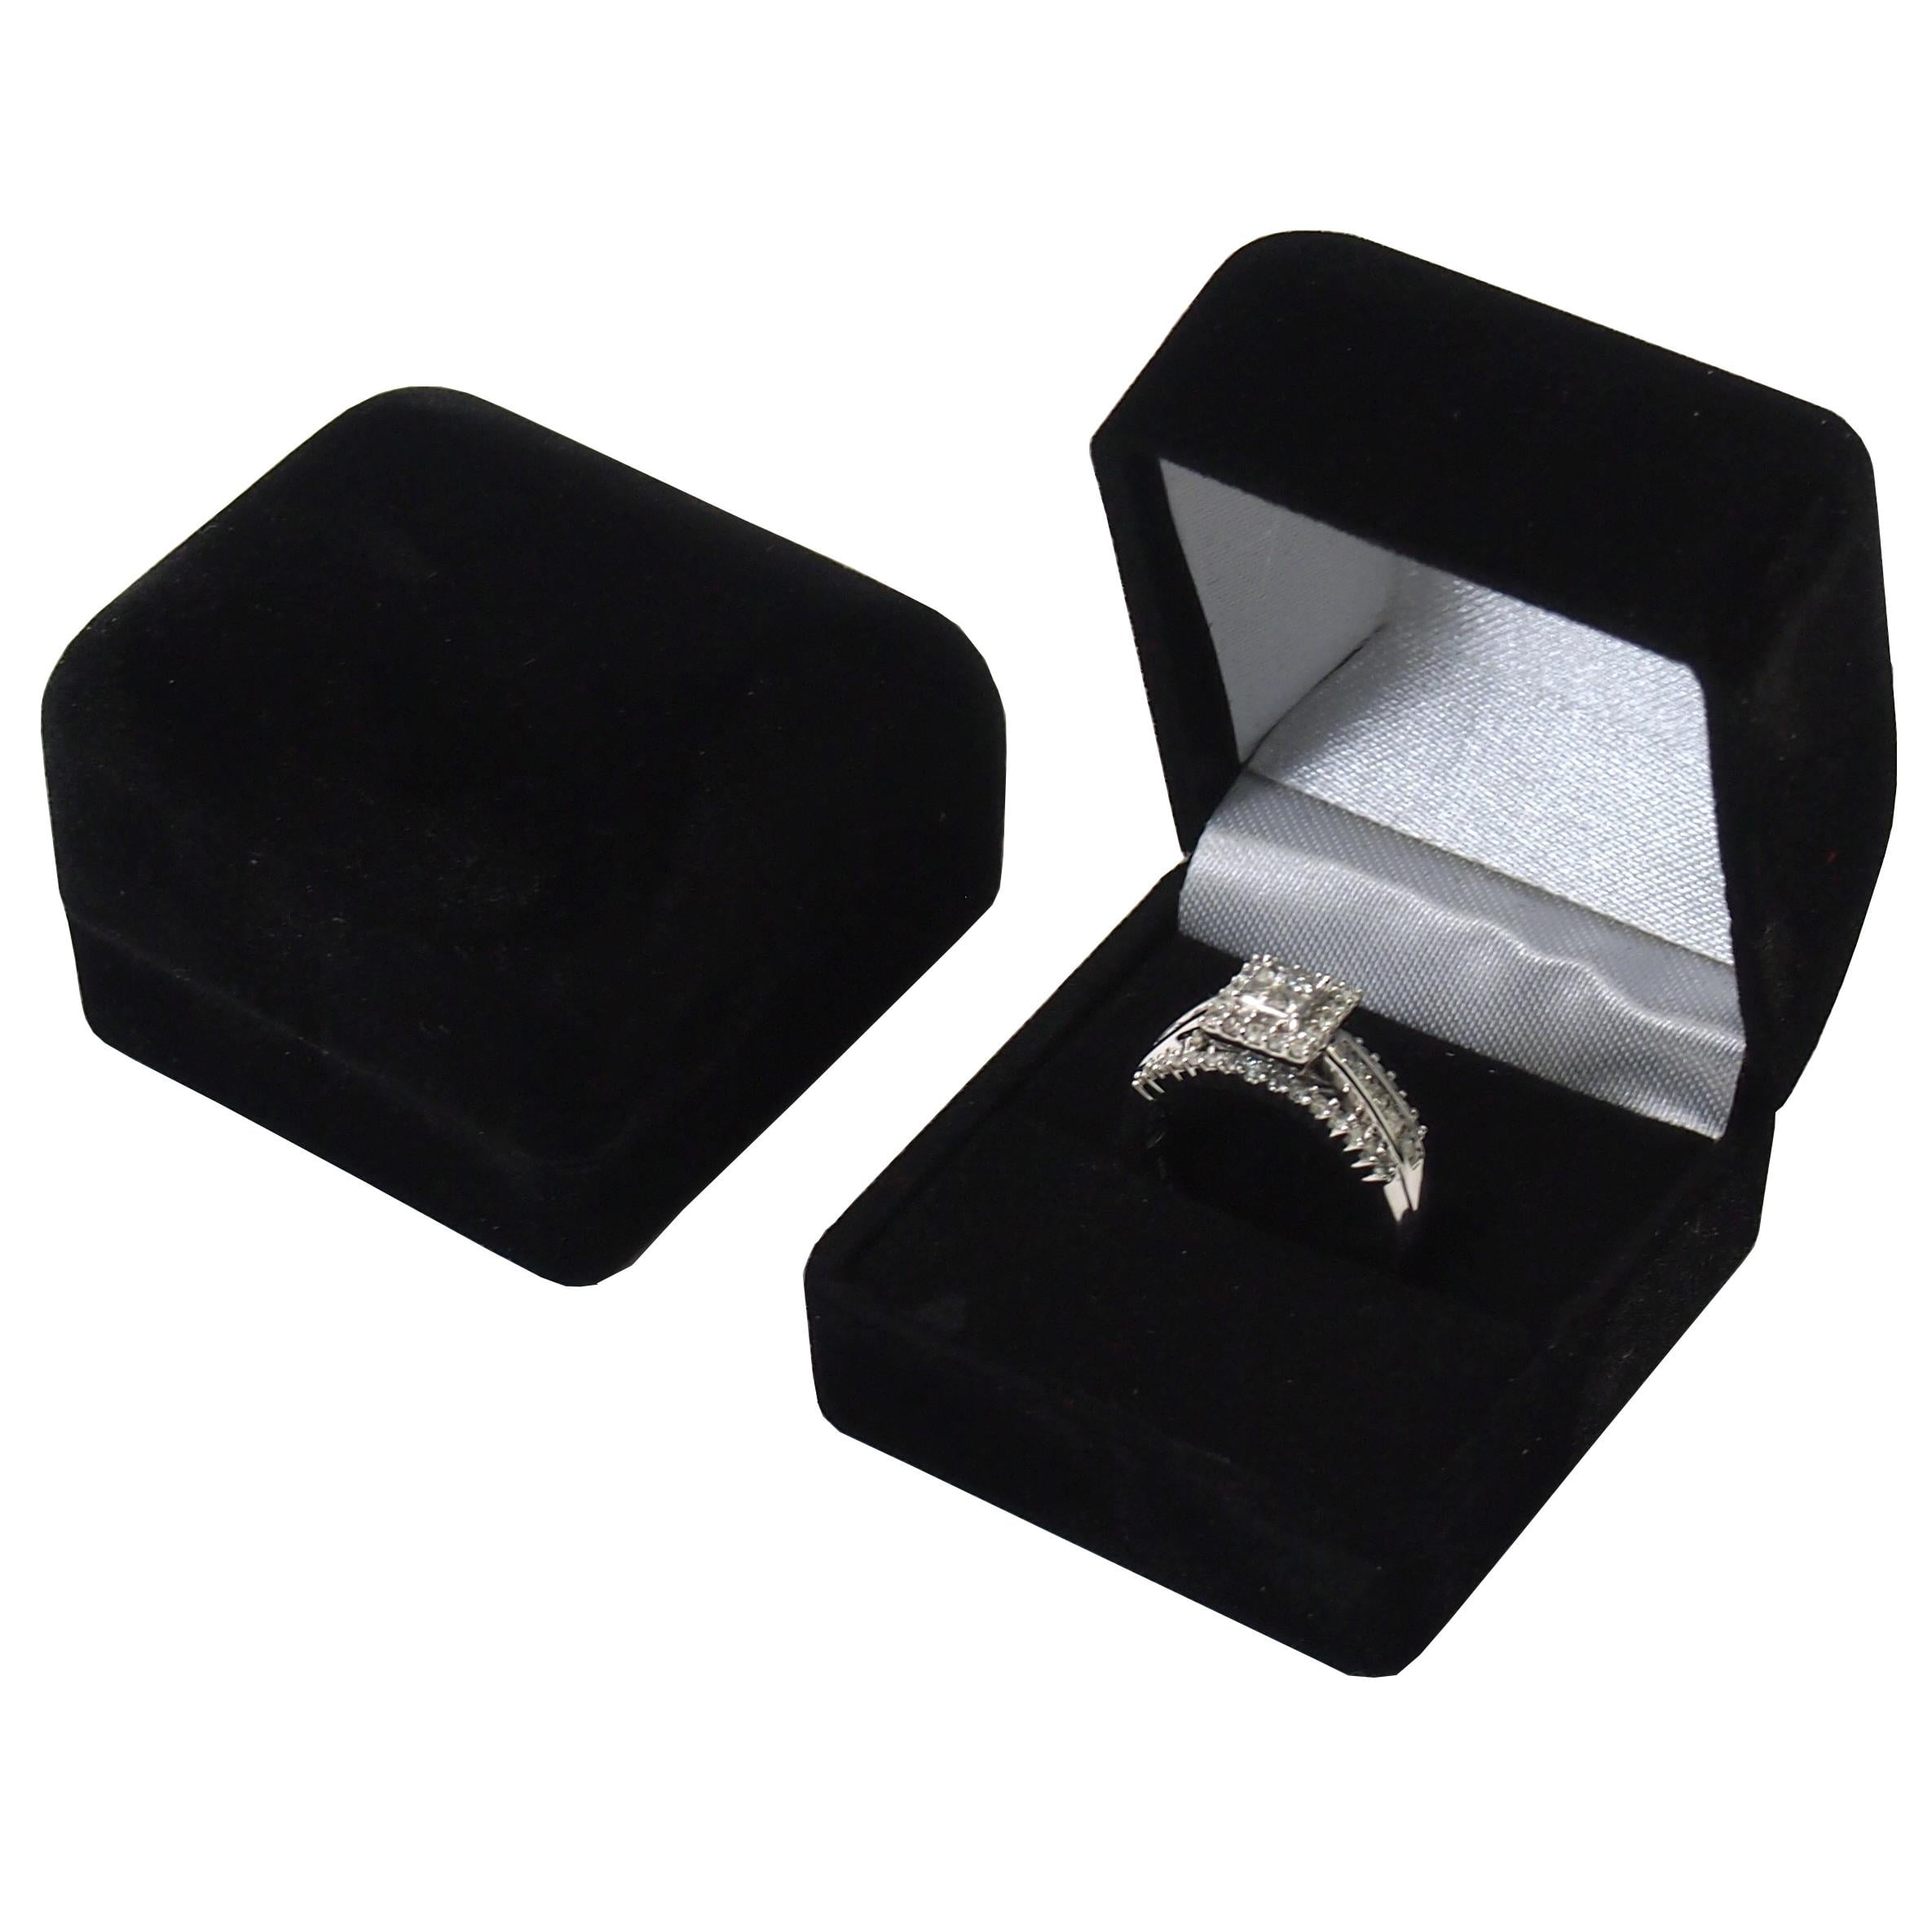 6 Black Flocked Square Ring Gift Boxes Jewelry Displays 